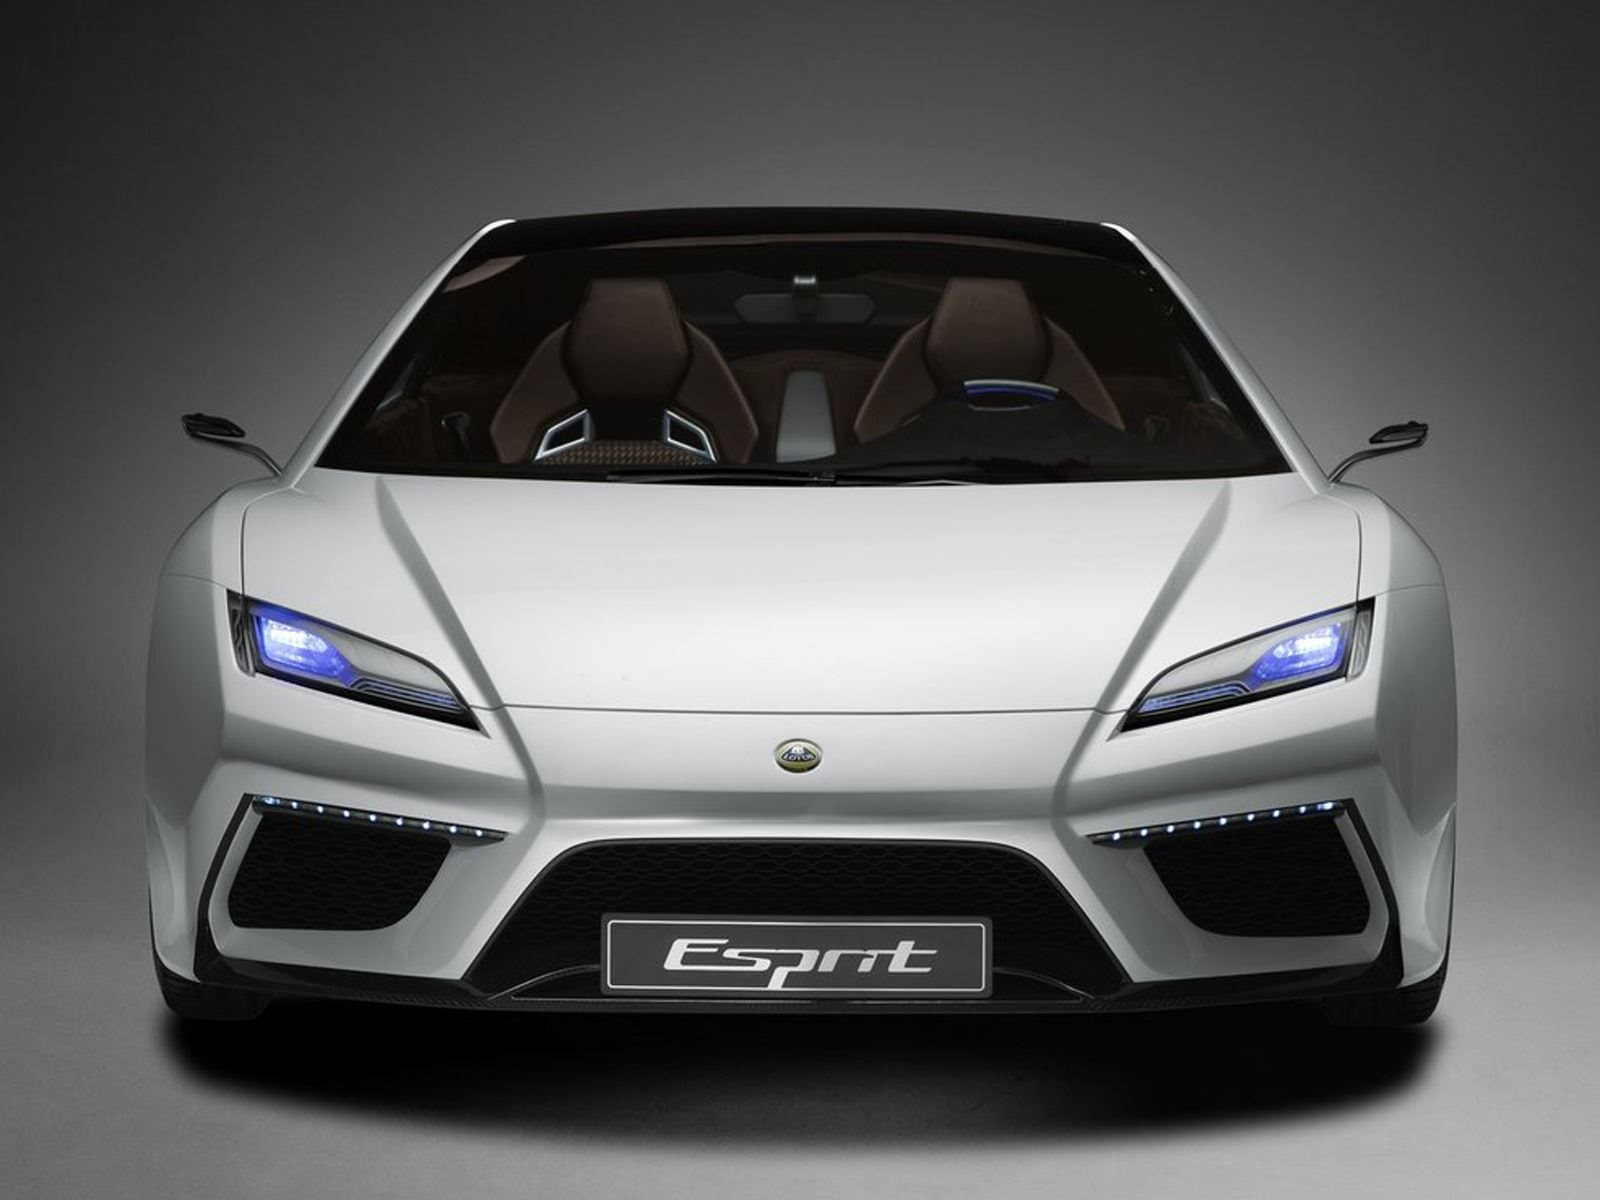 An All-New Lotus Esprit Will Debut In 2020 | CarBuzz